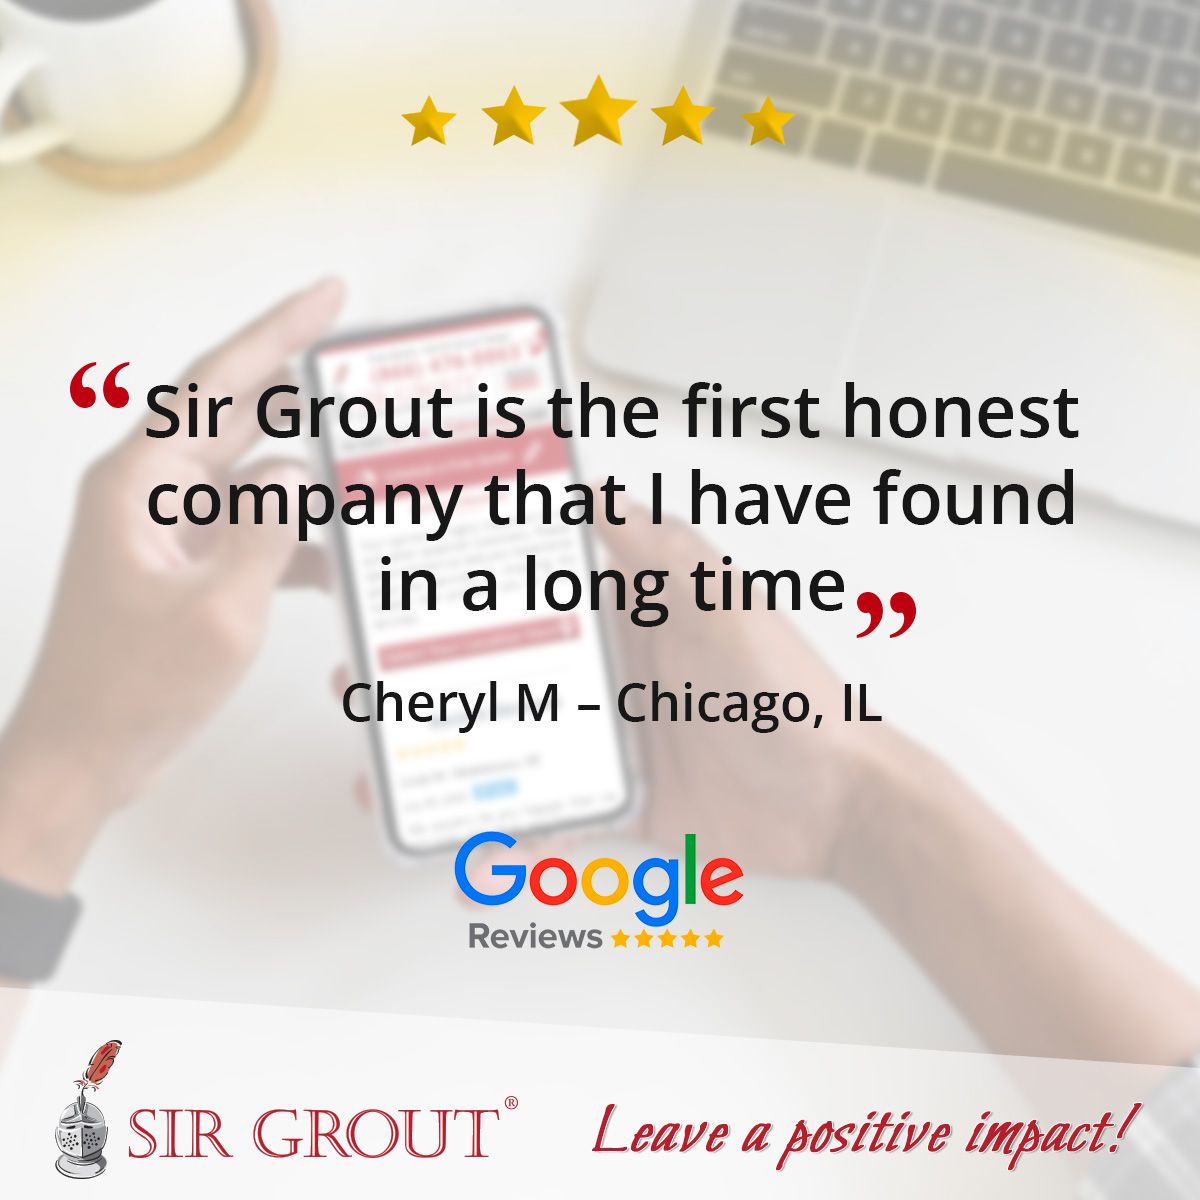 Sir Grout is the first honest company that I have found in a long time